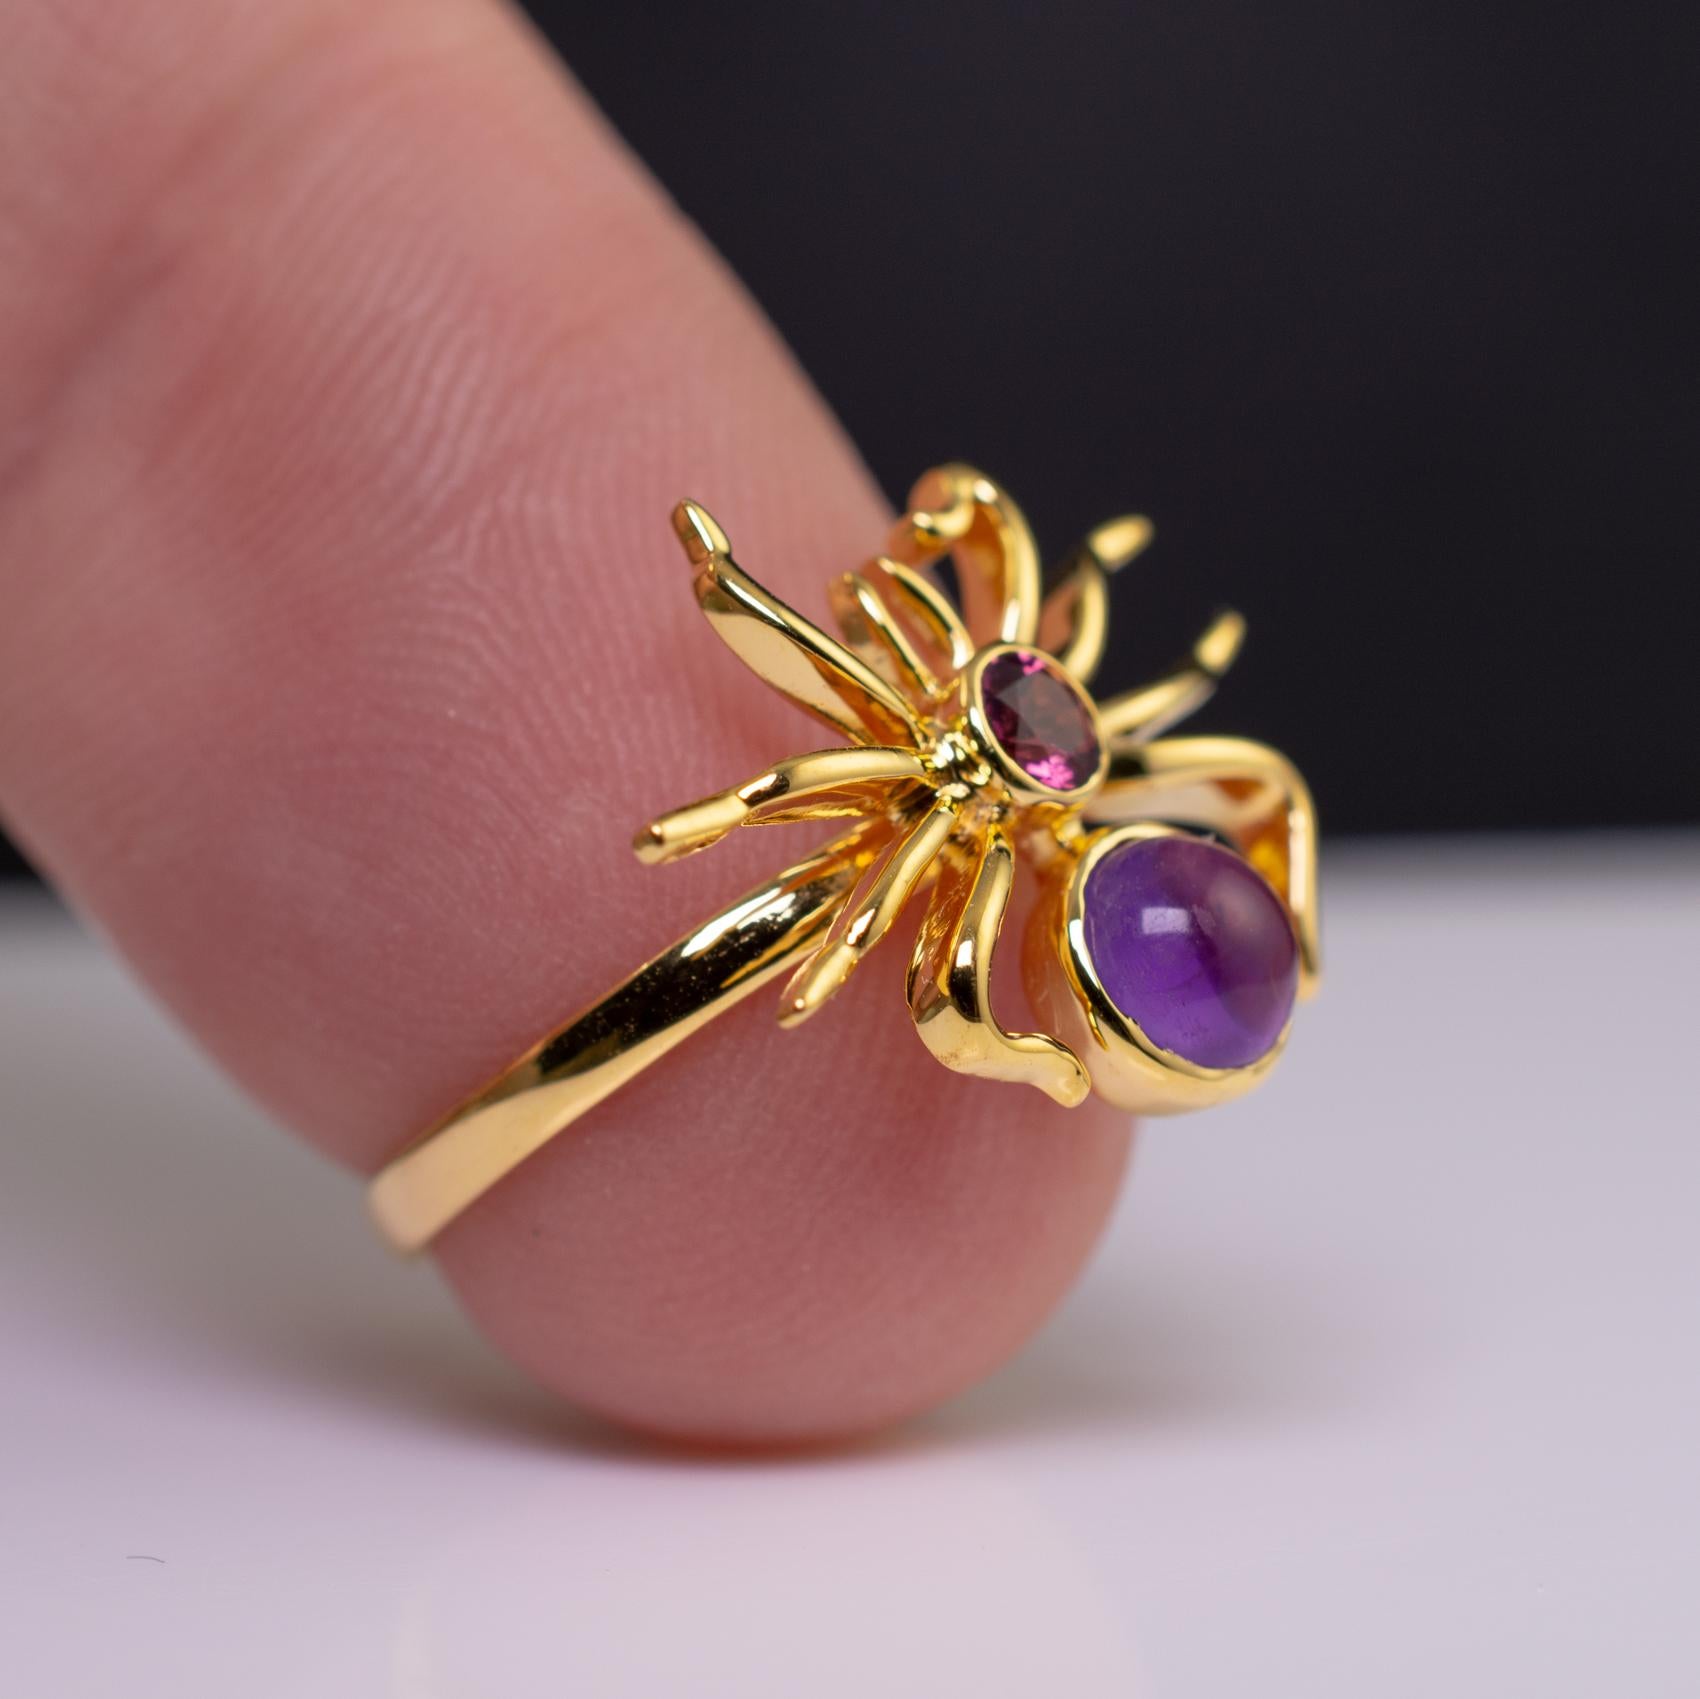 Artisan Spider Insect Ring 18 Karat Yellow Gold Pink Tourmaline and Amethyst